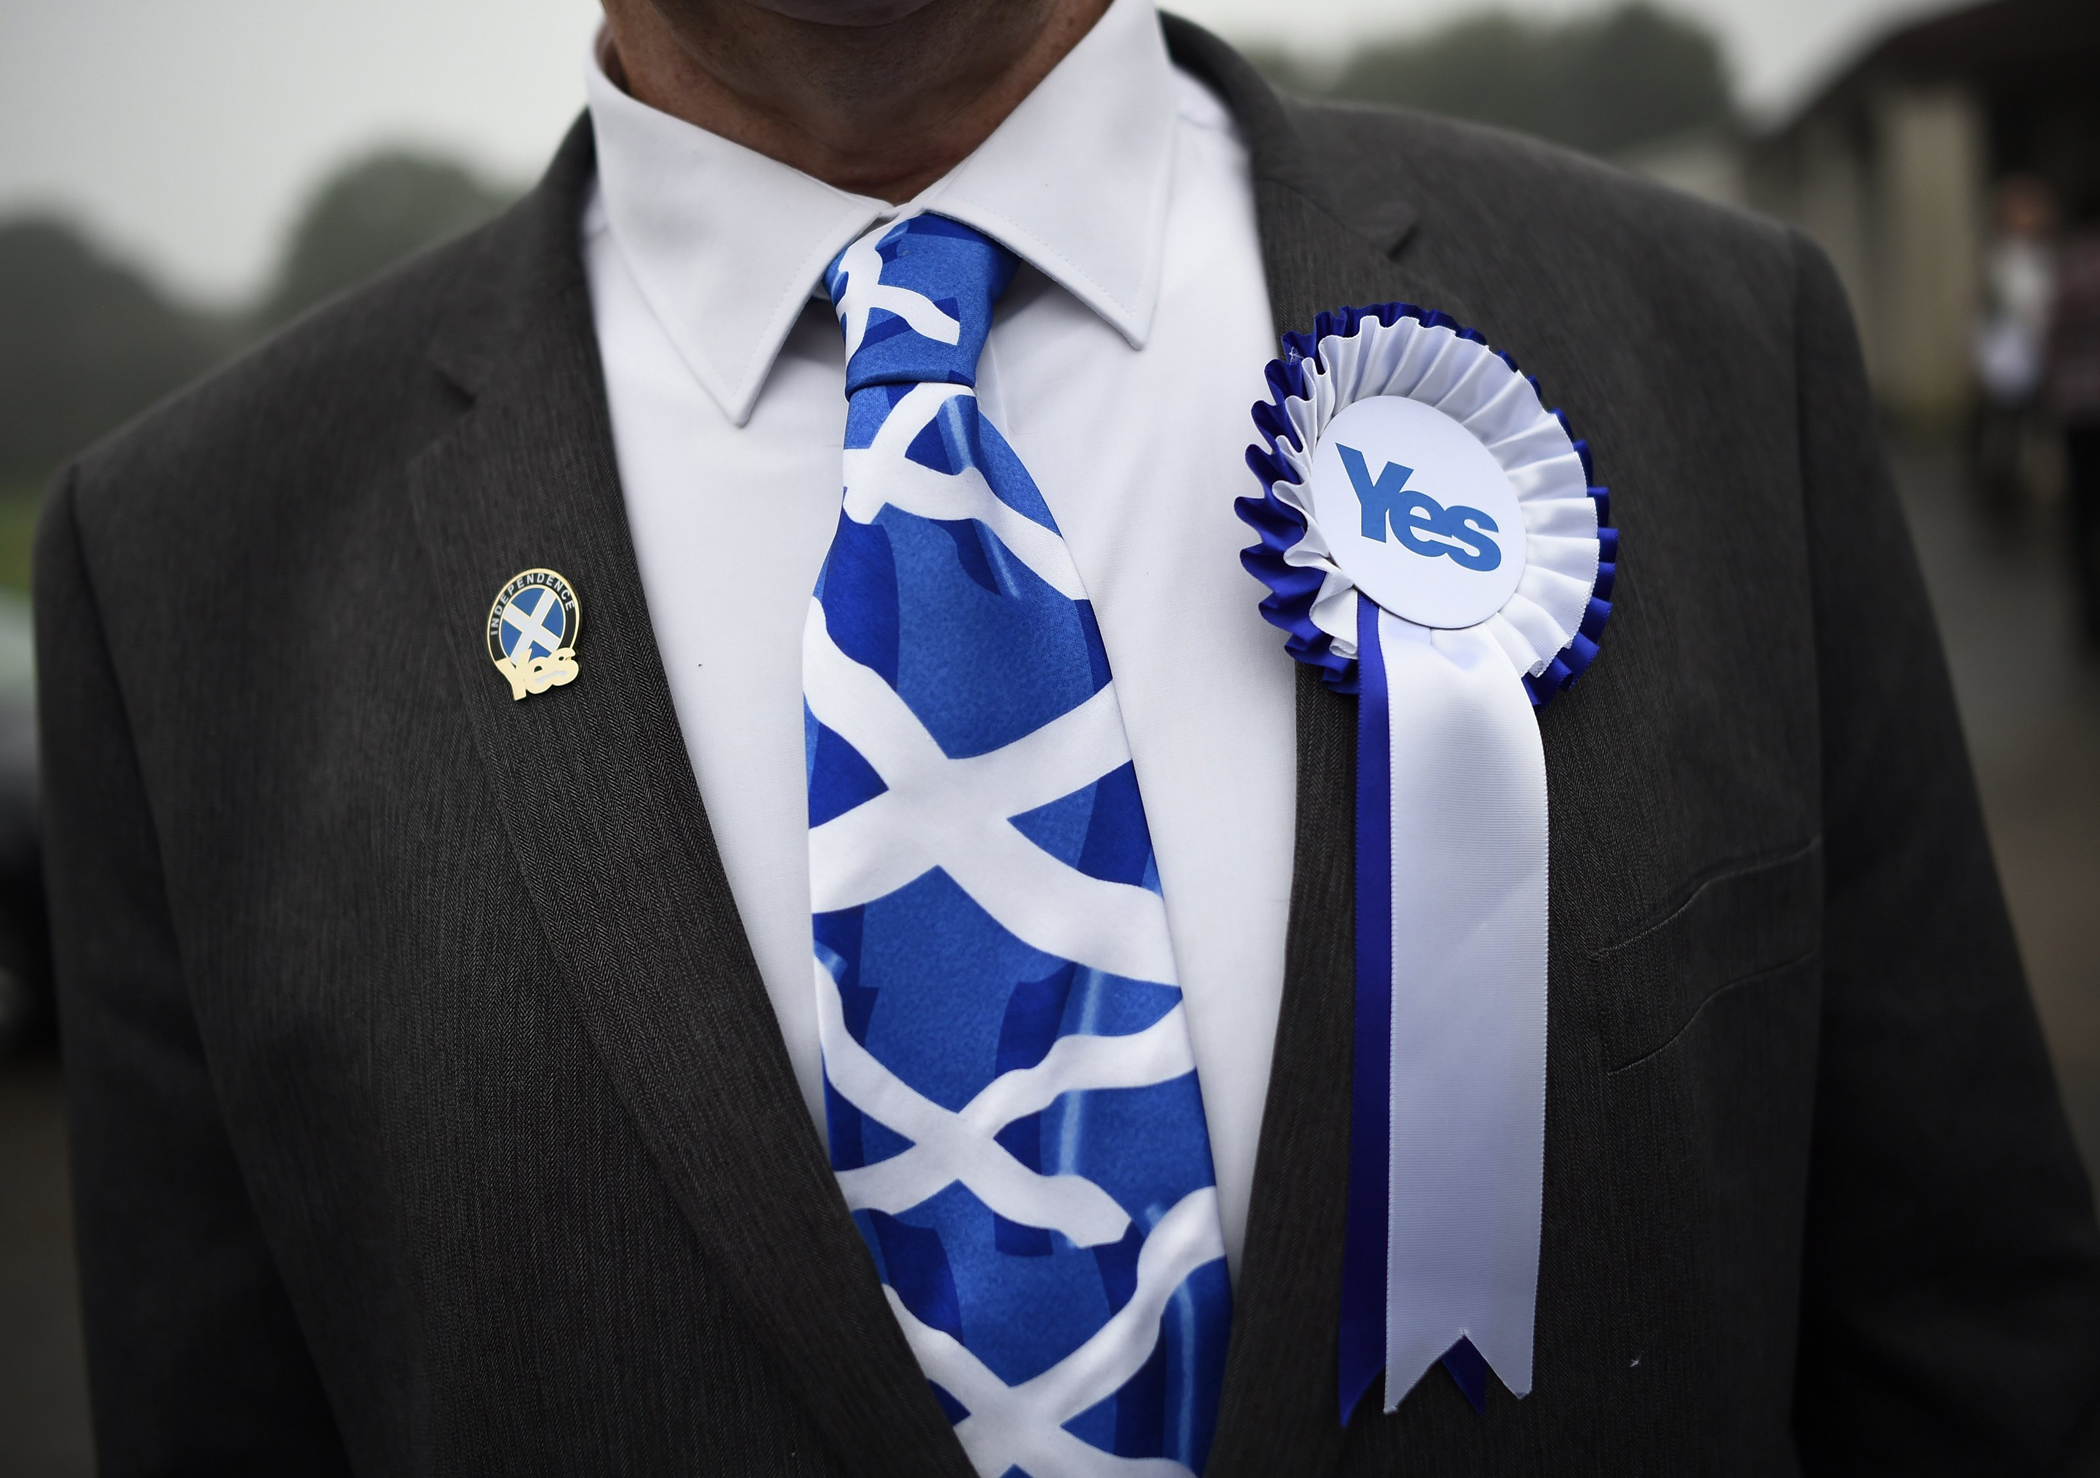 A supporter of the 'Yes' campaign stands outside a polling station as Scotland's First Minister Alex Salmond casts his vote during the referendum on Scottish independence in Strichen, Scotland, Sept. 18, 2014.